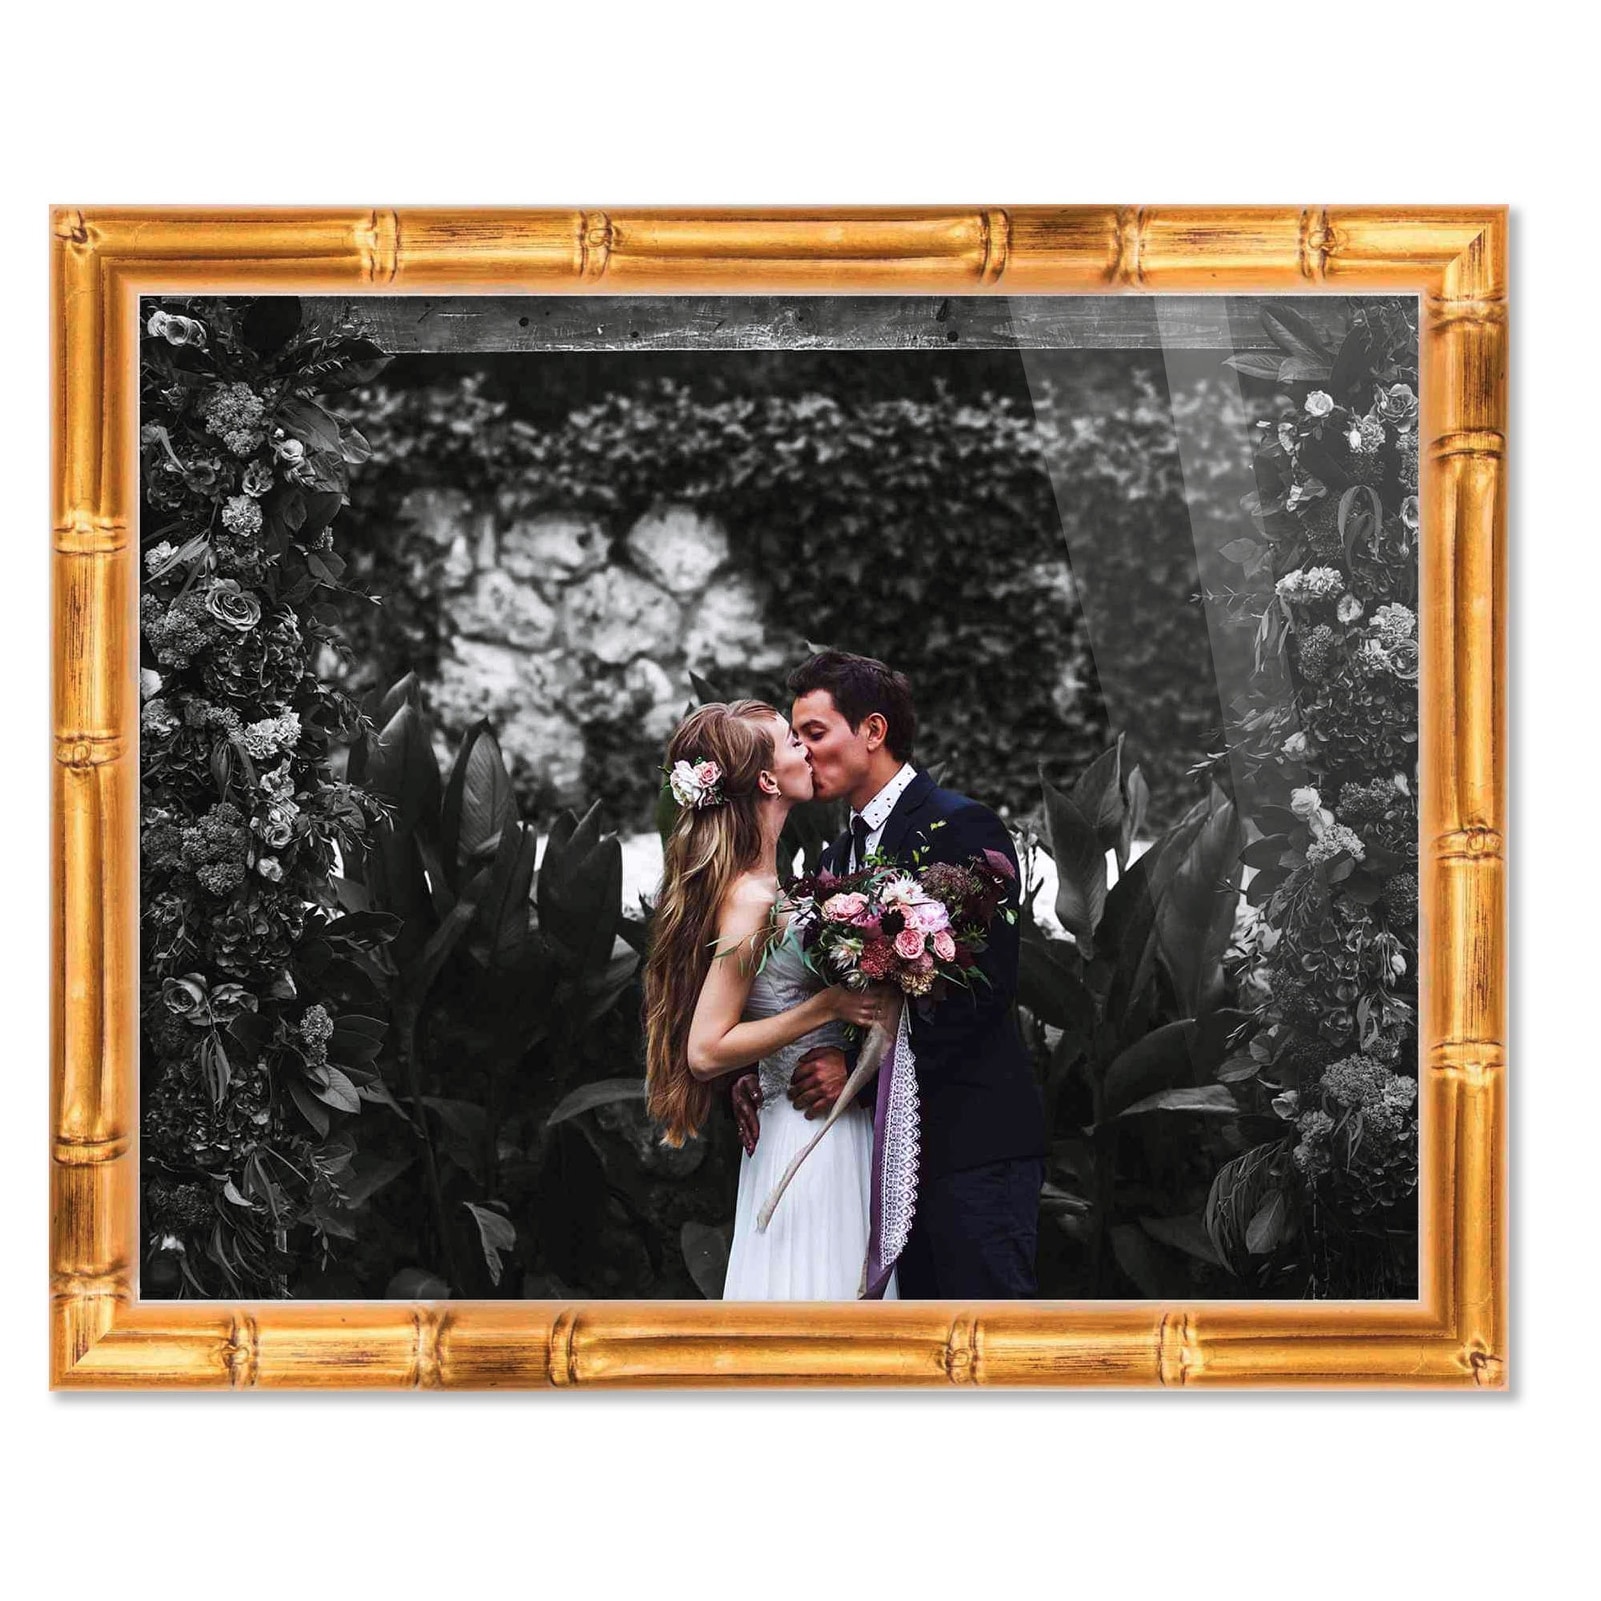 CustomPictureFrames 16x20 Gold Bamboo Wood Picture Frame - With Acrylic Front and Foam Board Backing